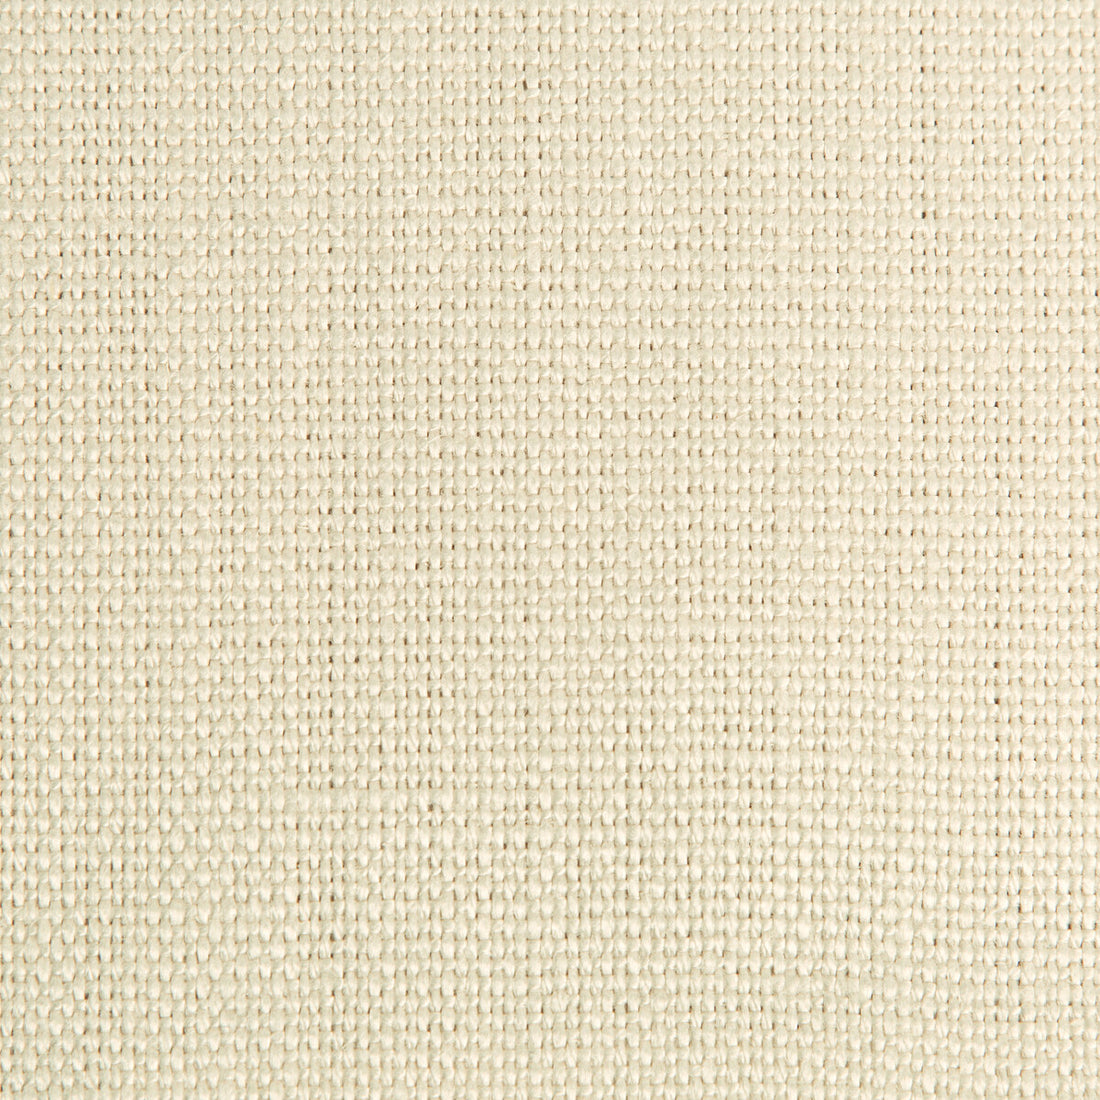 Kravet Couture fabric in 34813-1011 color - pattern 34813.1011.0 - by Kravet Couture in the Mabley Handler collection